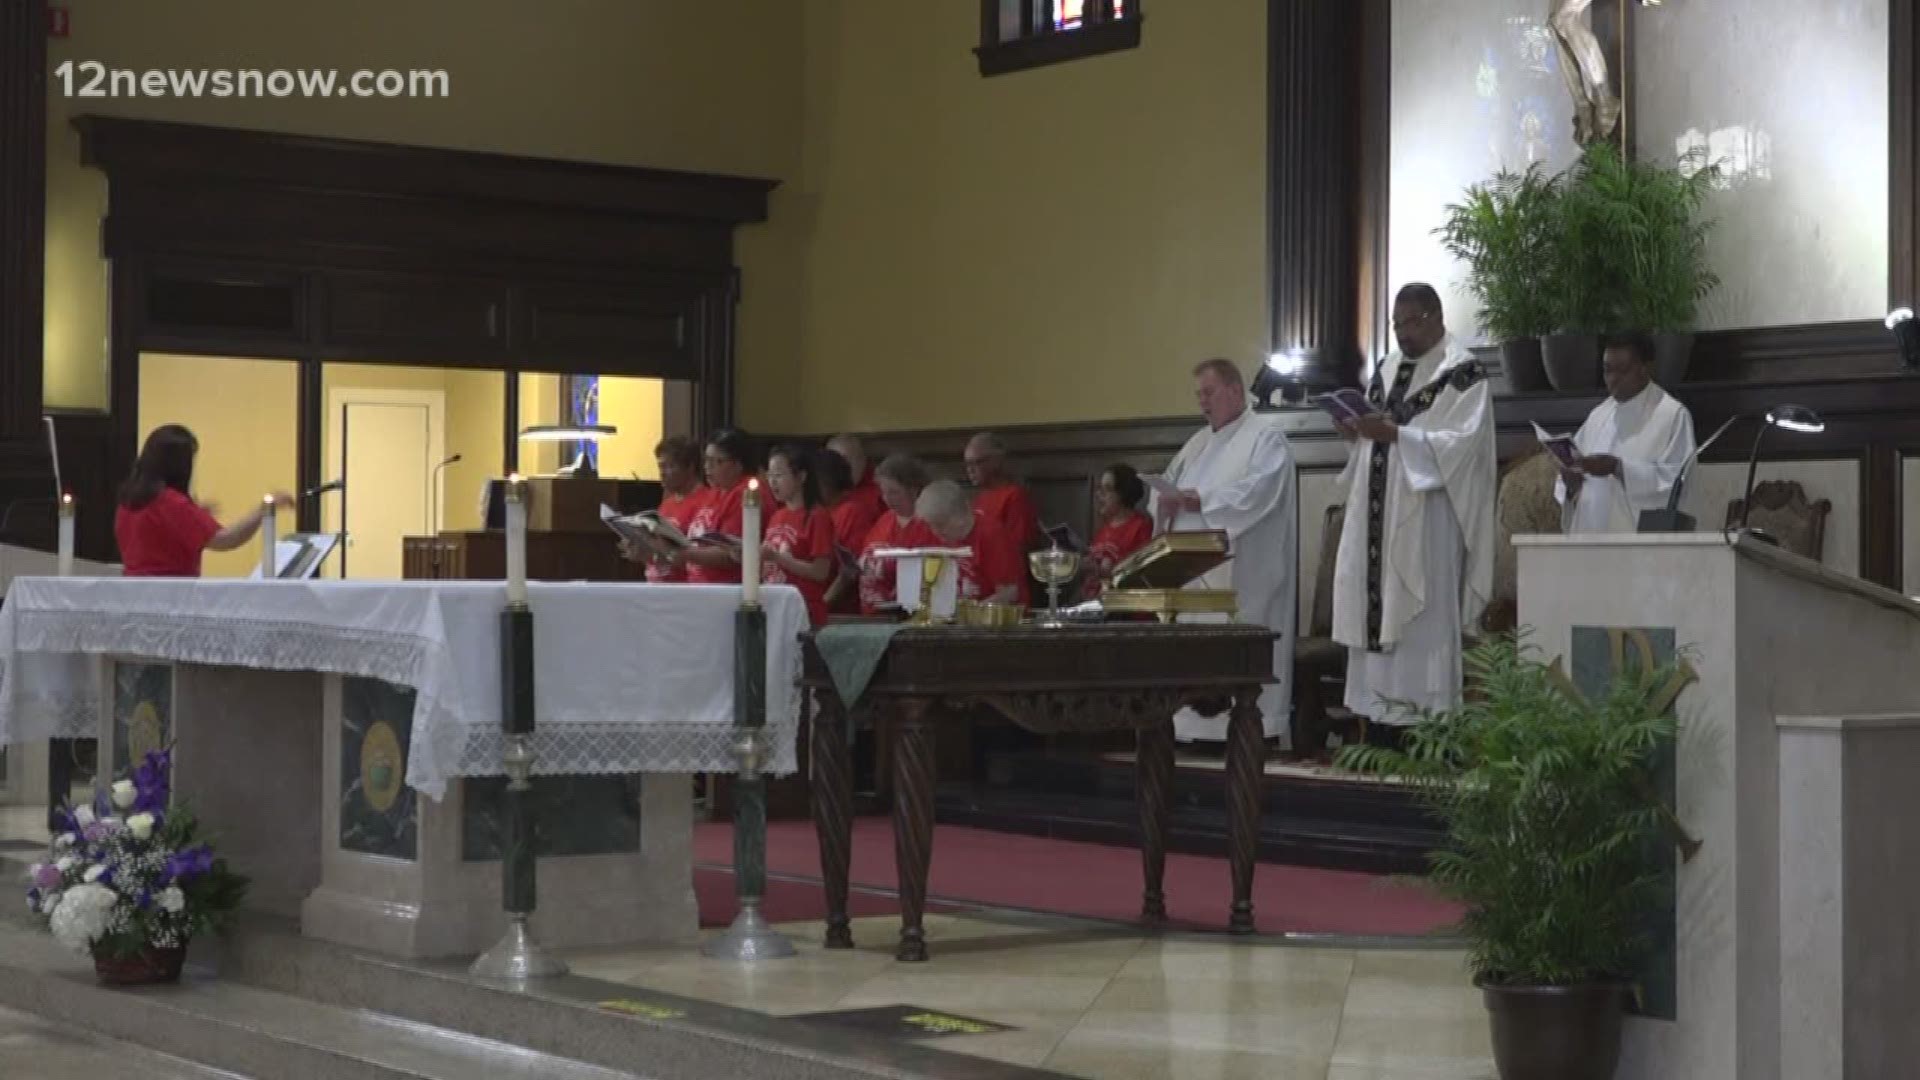 The community wide mass started at `11 a.m. at St. James Catholic Church in Port Arthur.